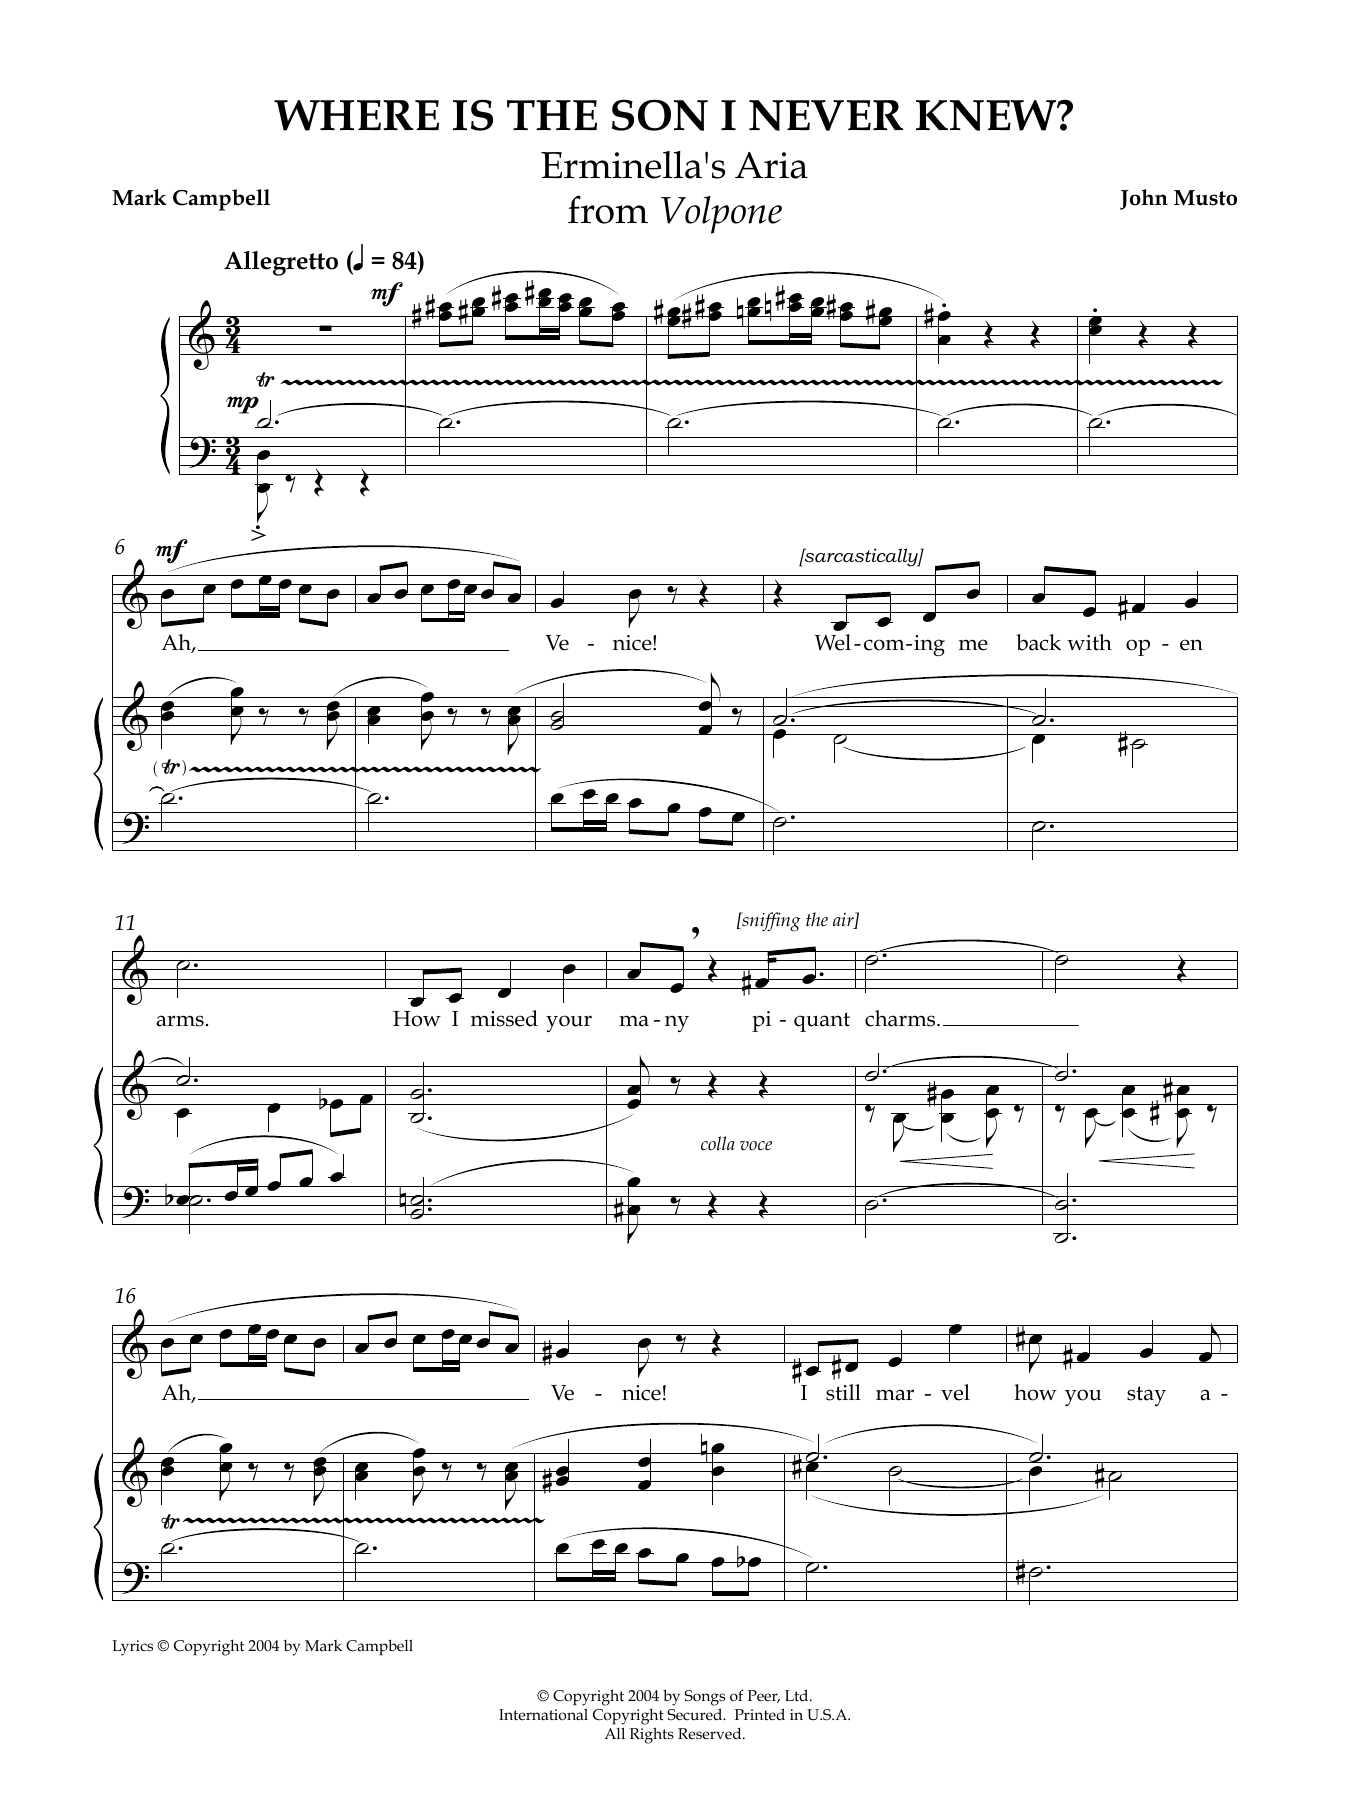 Download John Musto Where Is the Son I Never Knew? Sheet Music